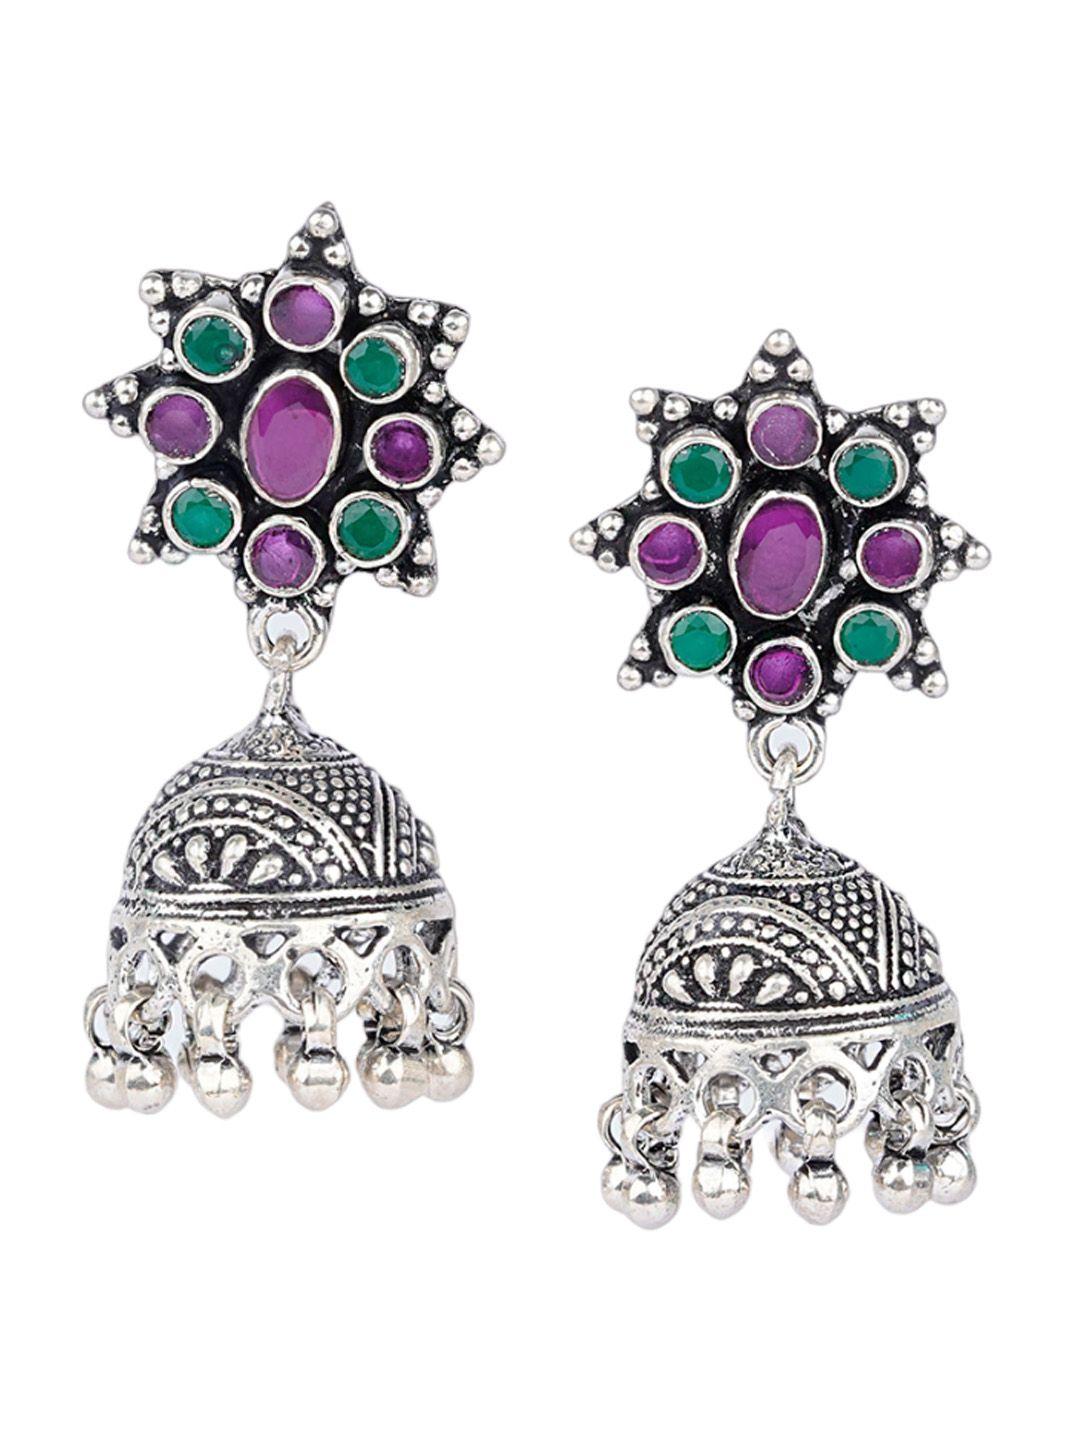 925 siller 925 pure silver rhodium-plated dome shaped jhumkas